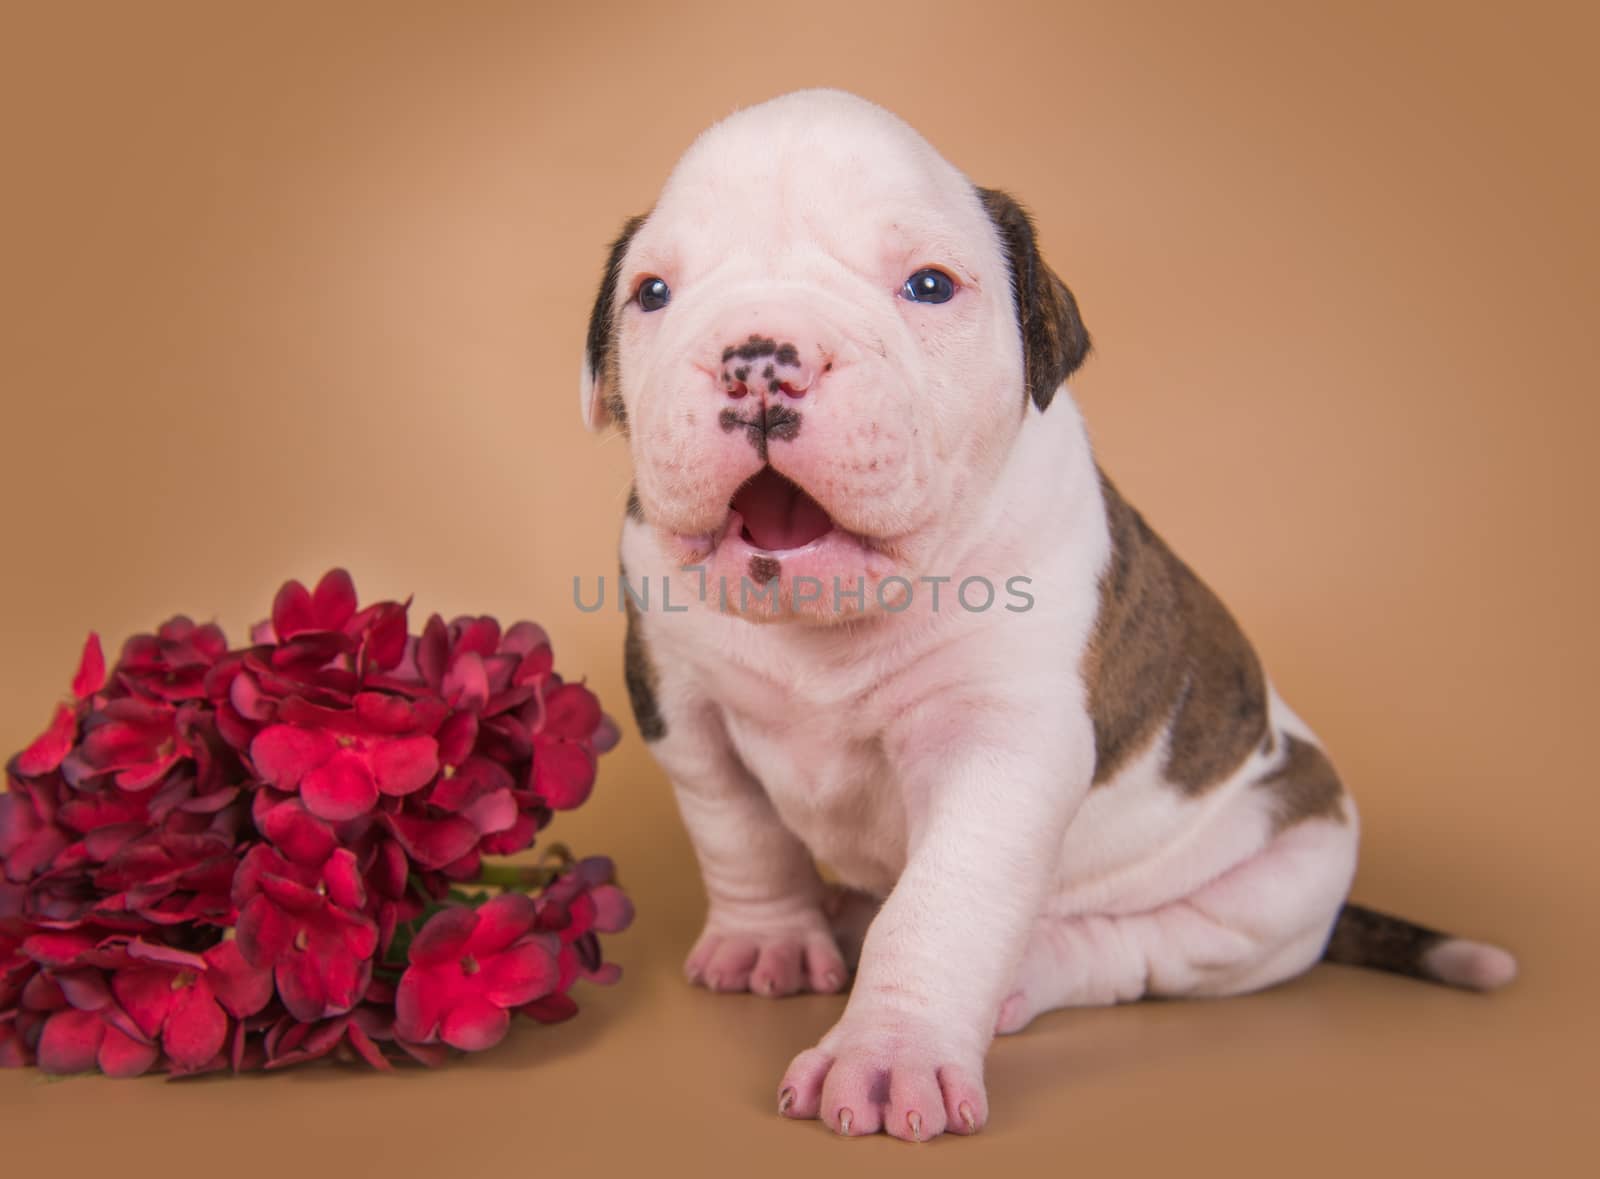 Funny small white American Bulldog puppy dog is sitting on light brown background with autumn flowers.